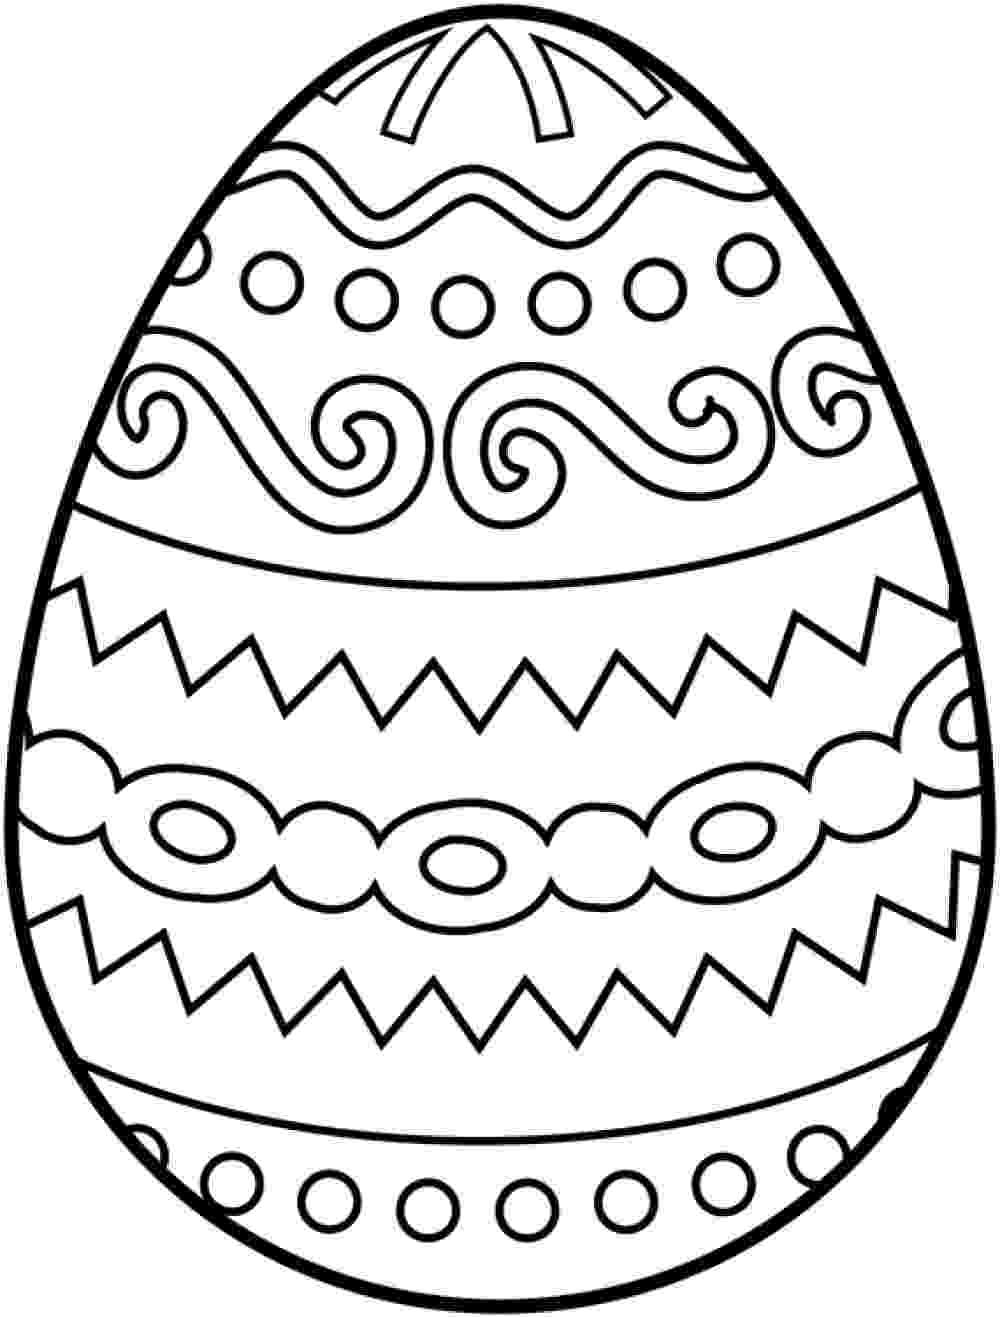 egg coloring pages easter egg coloring pages getcoloringpagescom pages egg coloring 